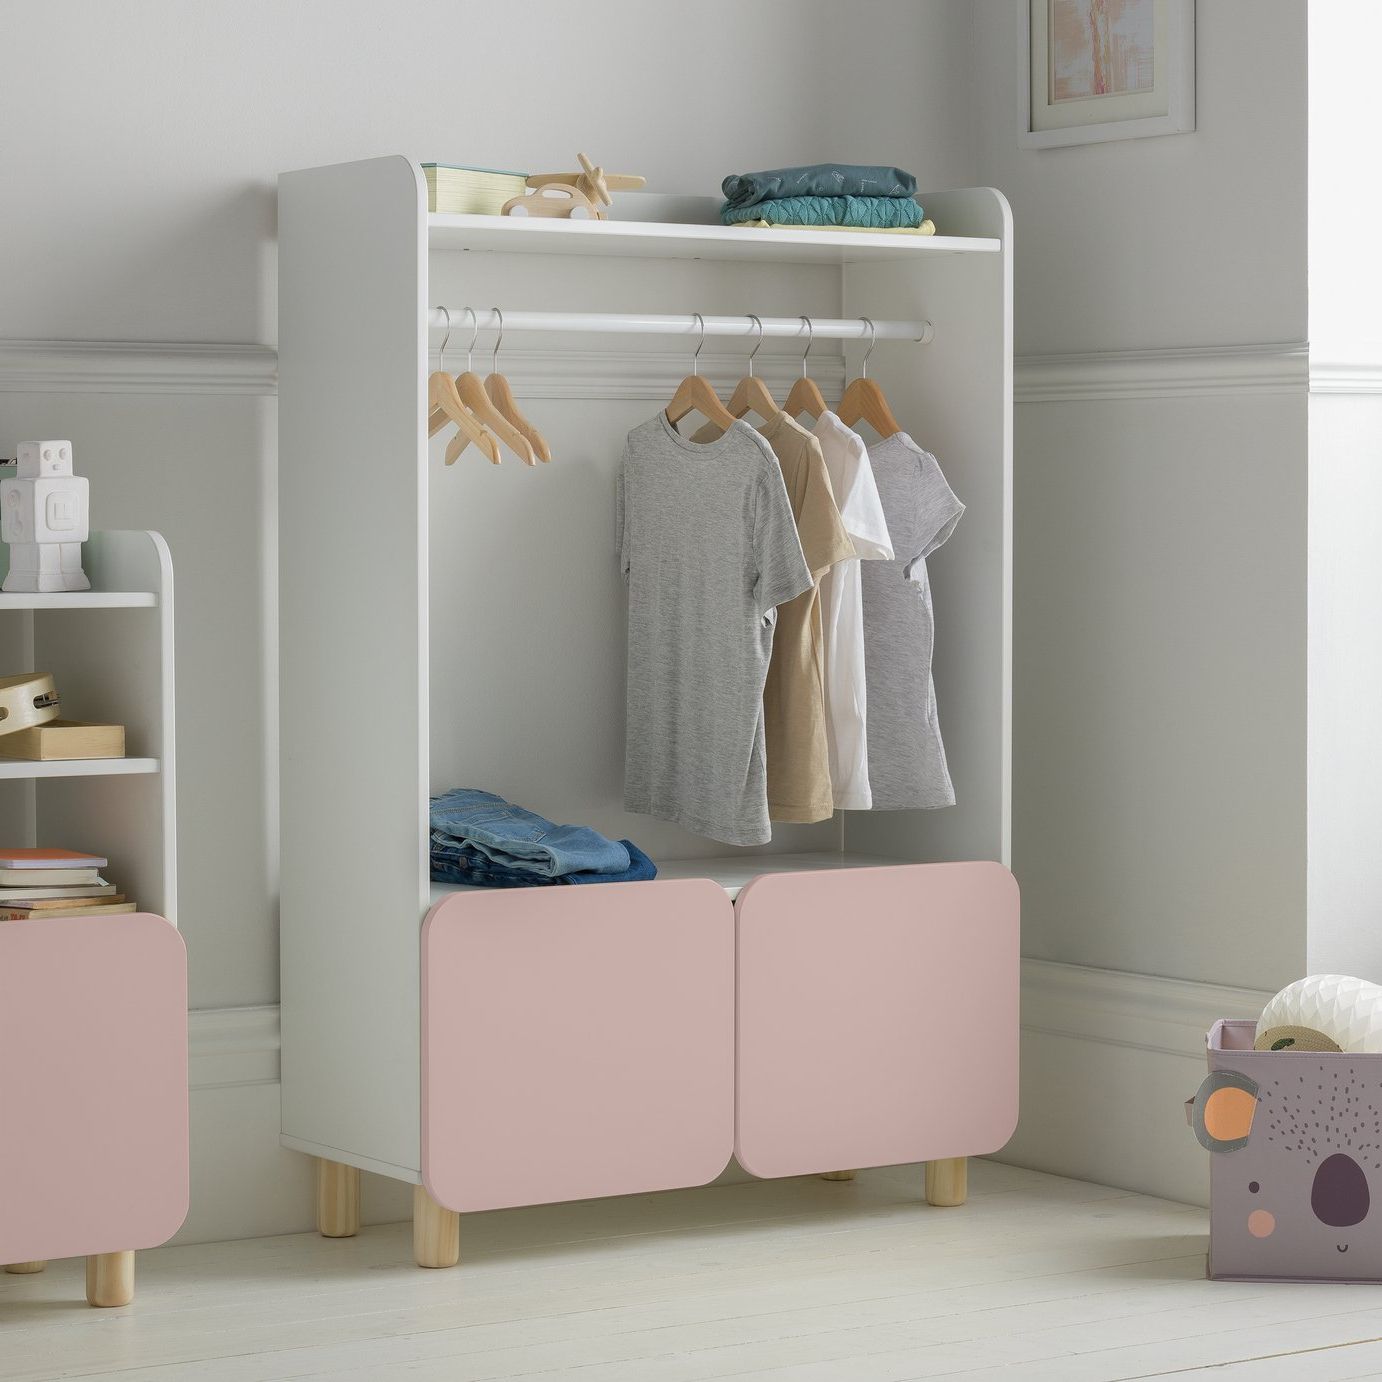 Argos Home Milo Dressing Rail – Pink | Compare Furnishings For Argos Double Rail Wardrobes (Gallery 7 of 20)